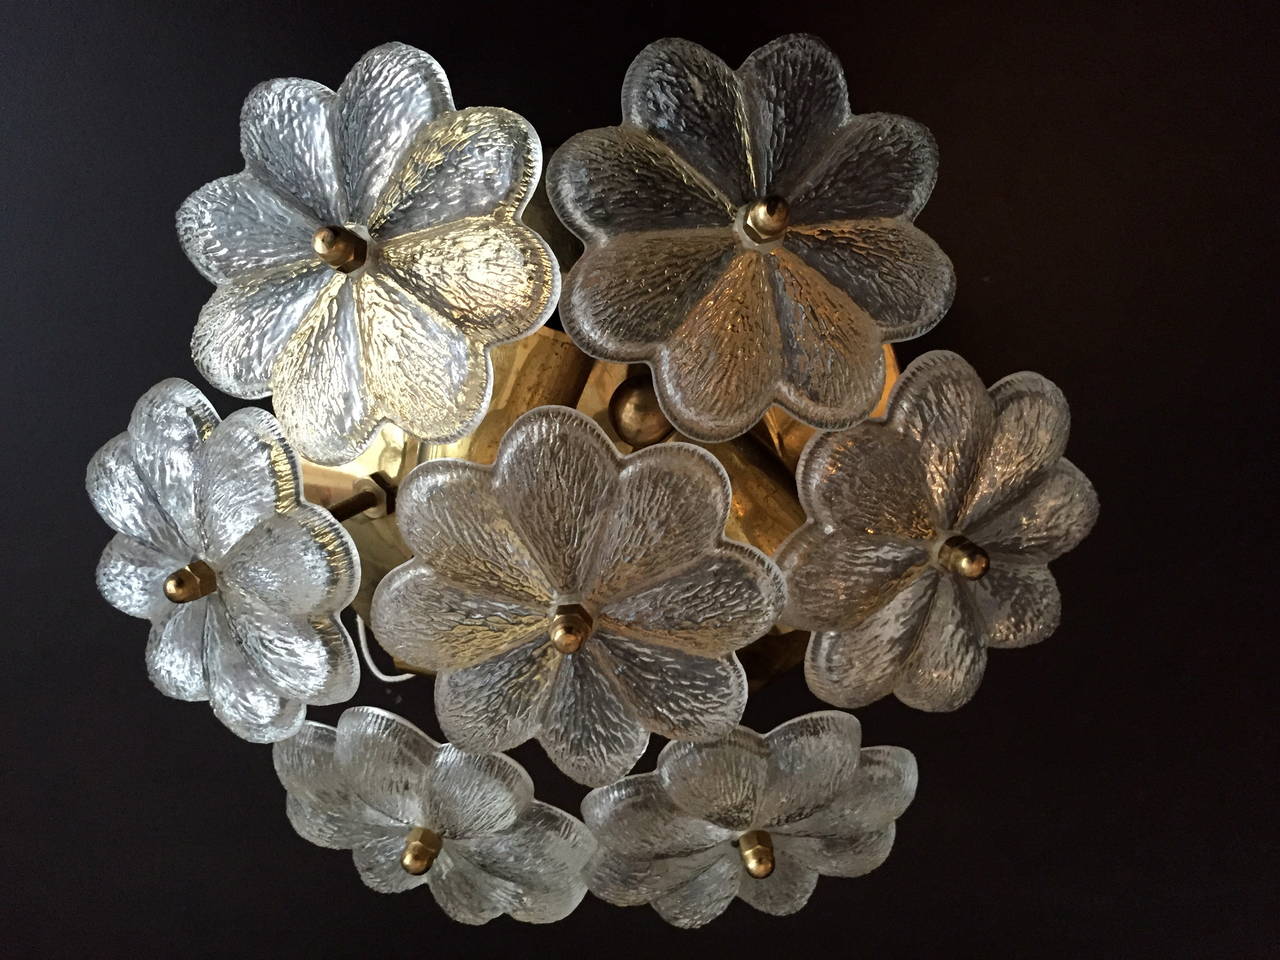 A great decorative pair of 1950s Austria polished brass fixtures with flower glass elements. Rewired. Can be used as flush ceiling lights or wall sconces. Three light sources each.